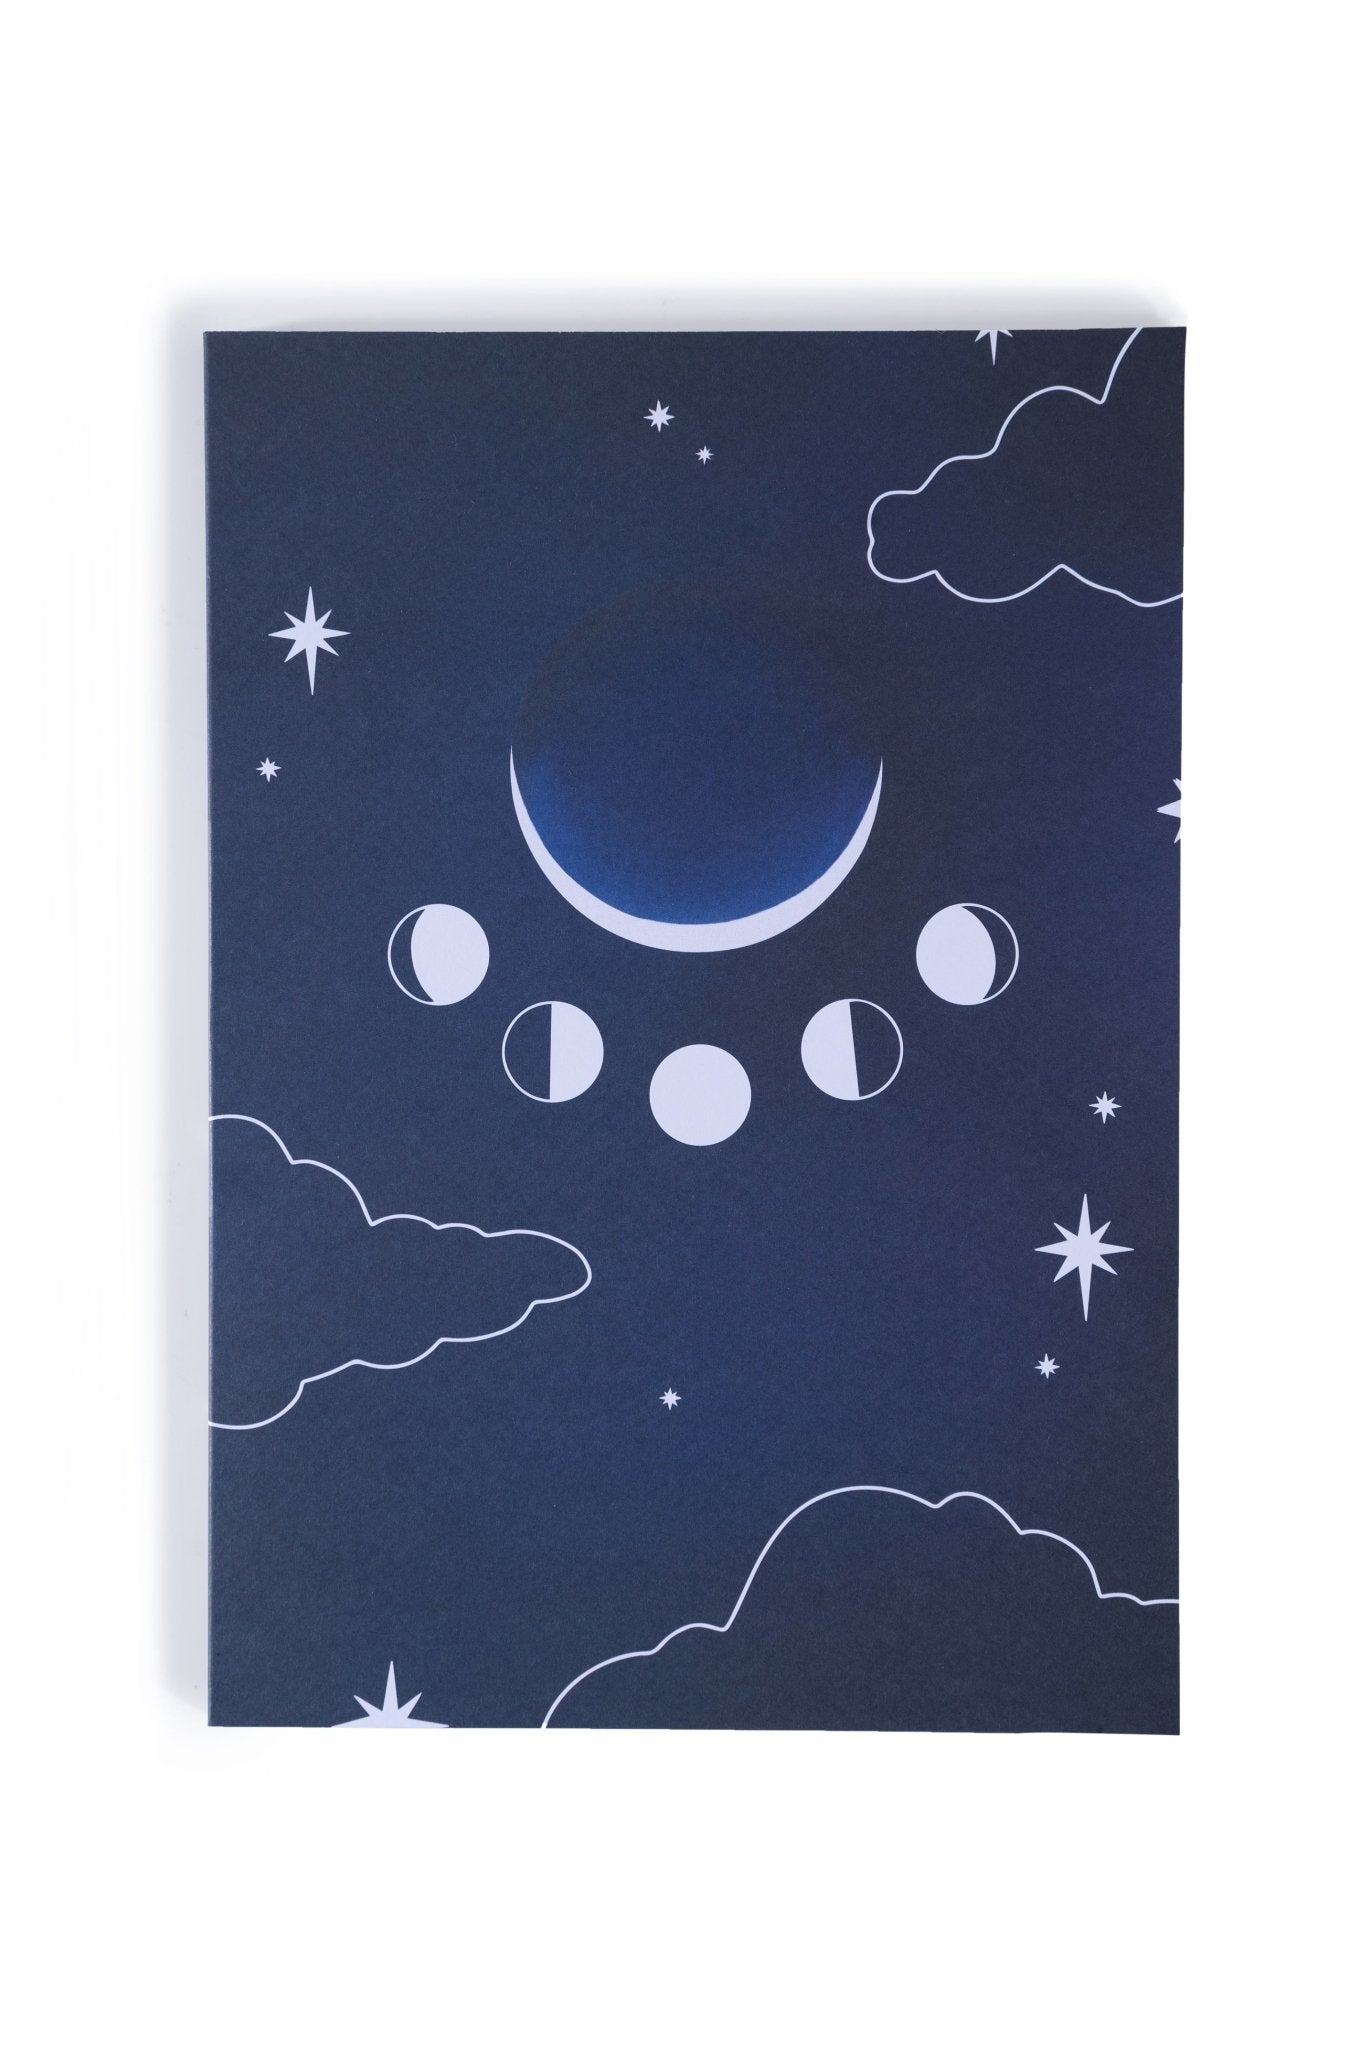 An Adelfi original journal design set in a dark blue night sky with cloud outlines, stars, and moon phases. Behind the journal is a white background.